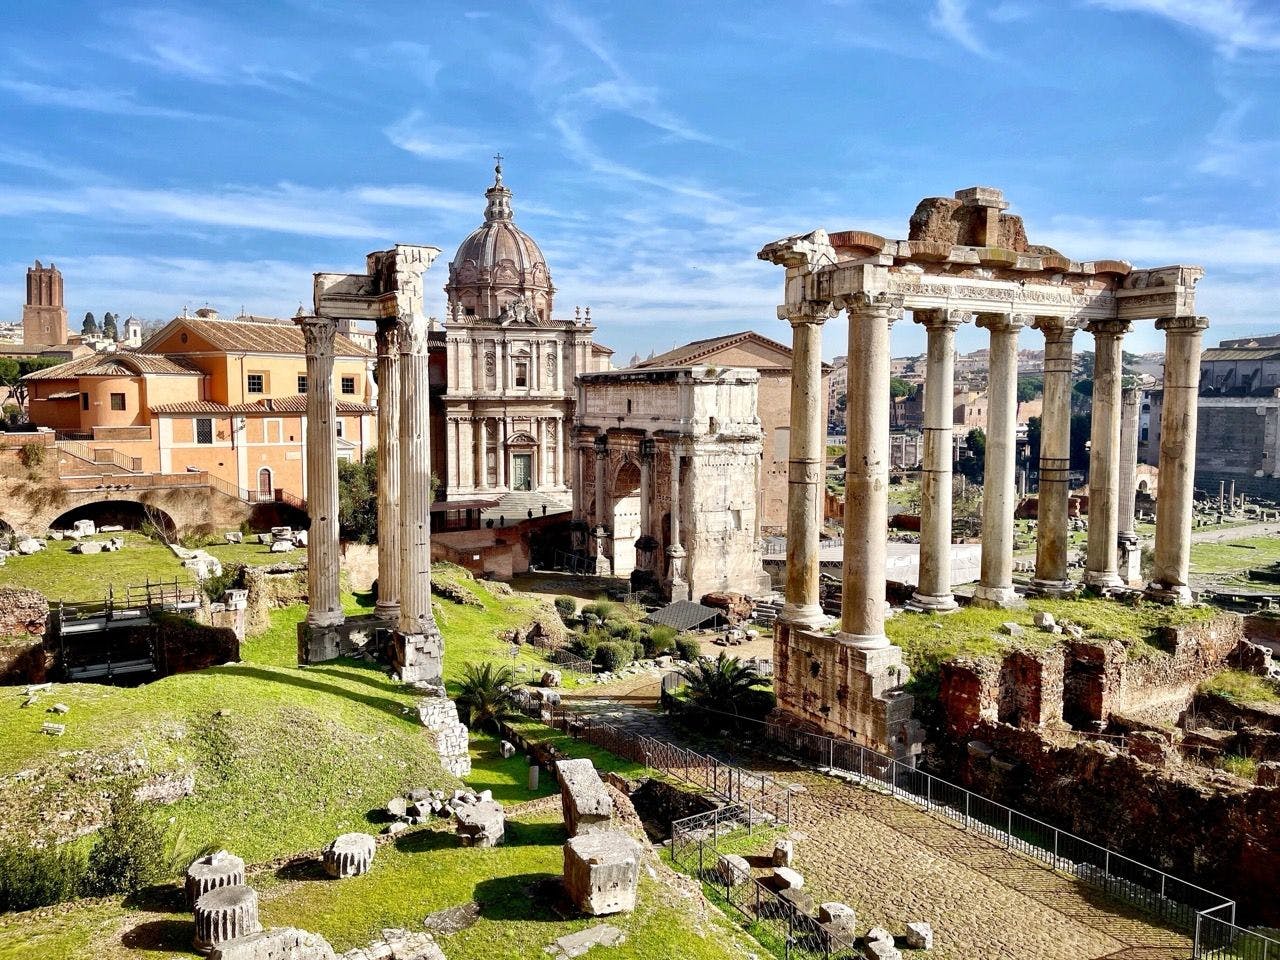 Forum ruins in the city center of Rome